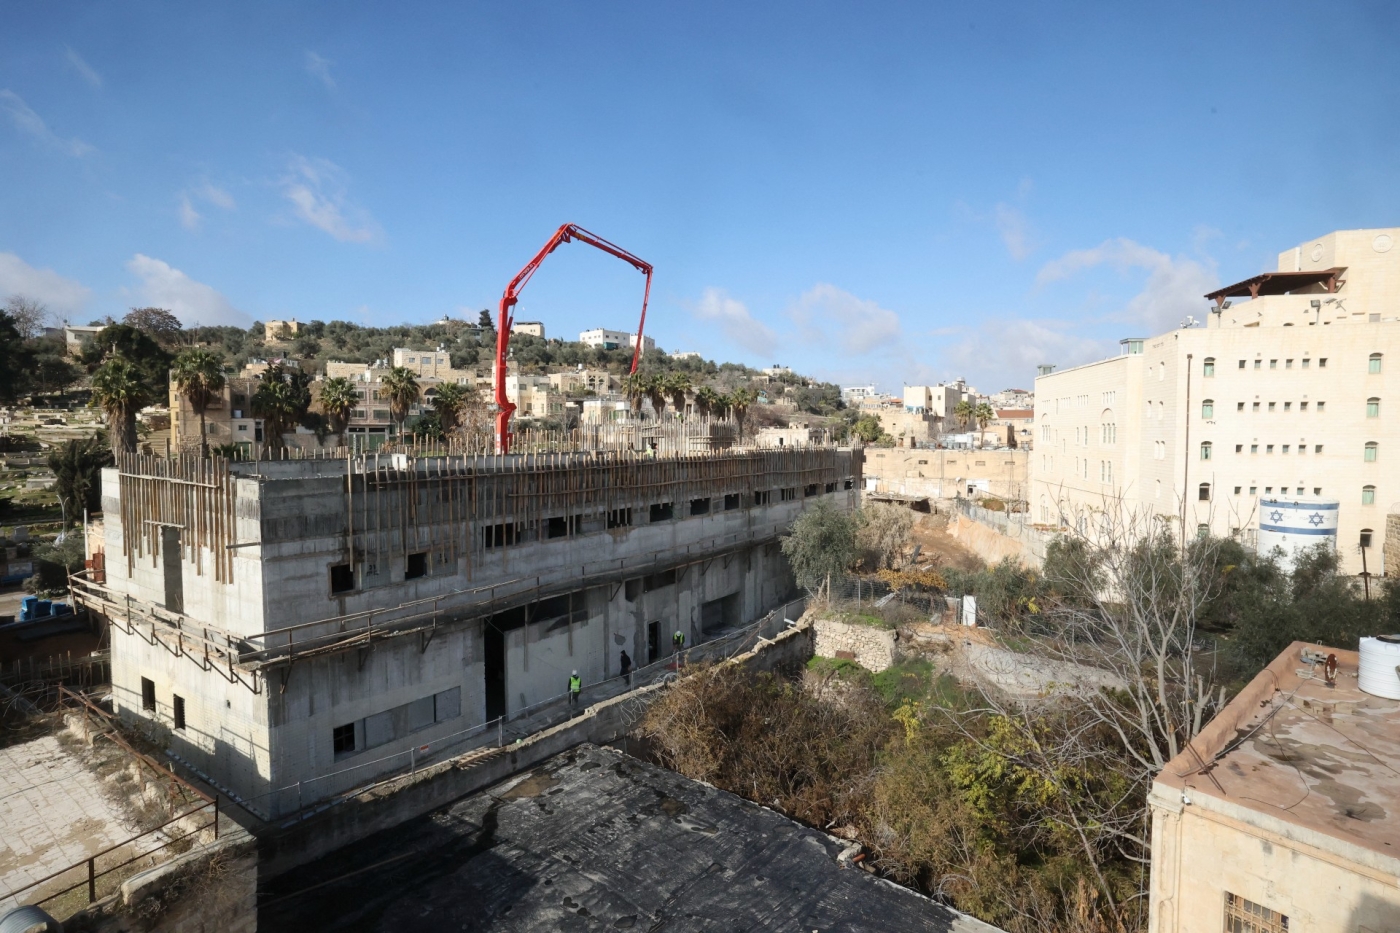 Builders work on new constructions in a settlement zone in the occupied West Bank's Hebron (AFP)